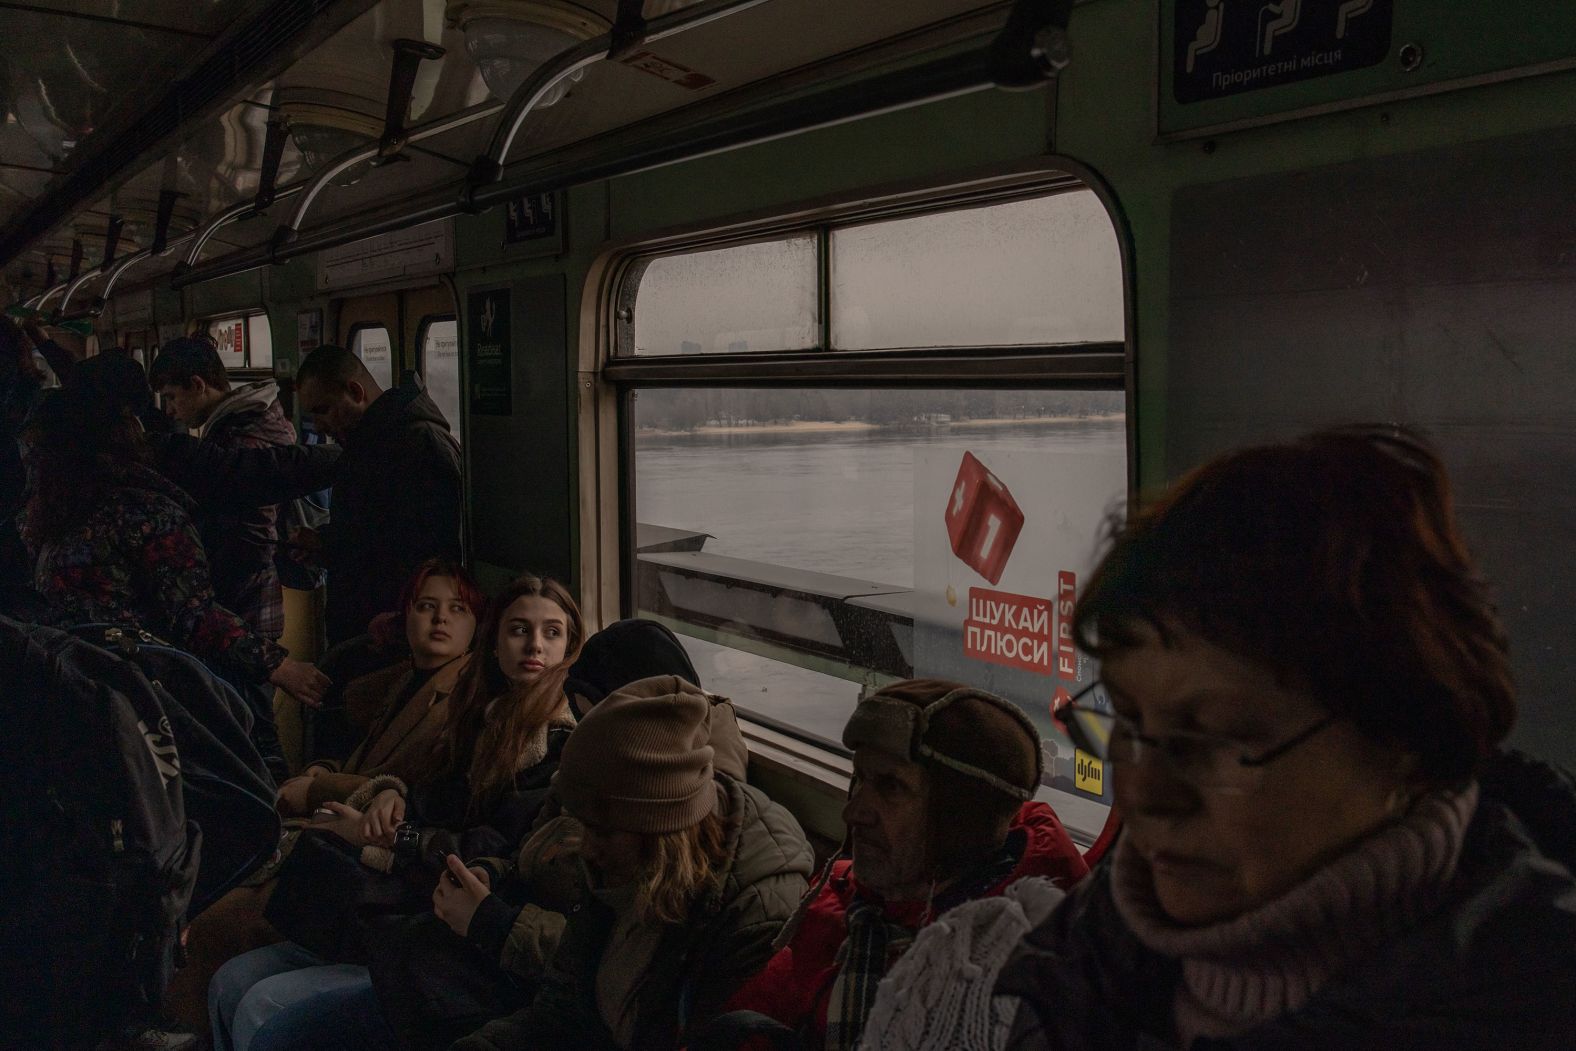 People ride on a subway in Kyiv, Ukraine, on Wednesday, March 6.